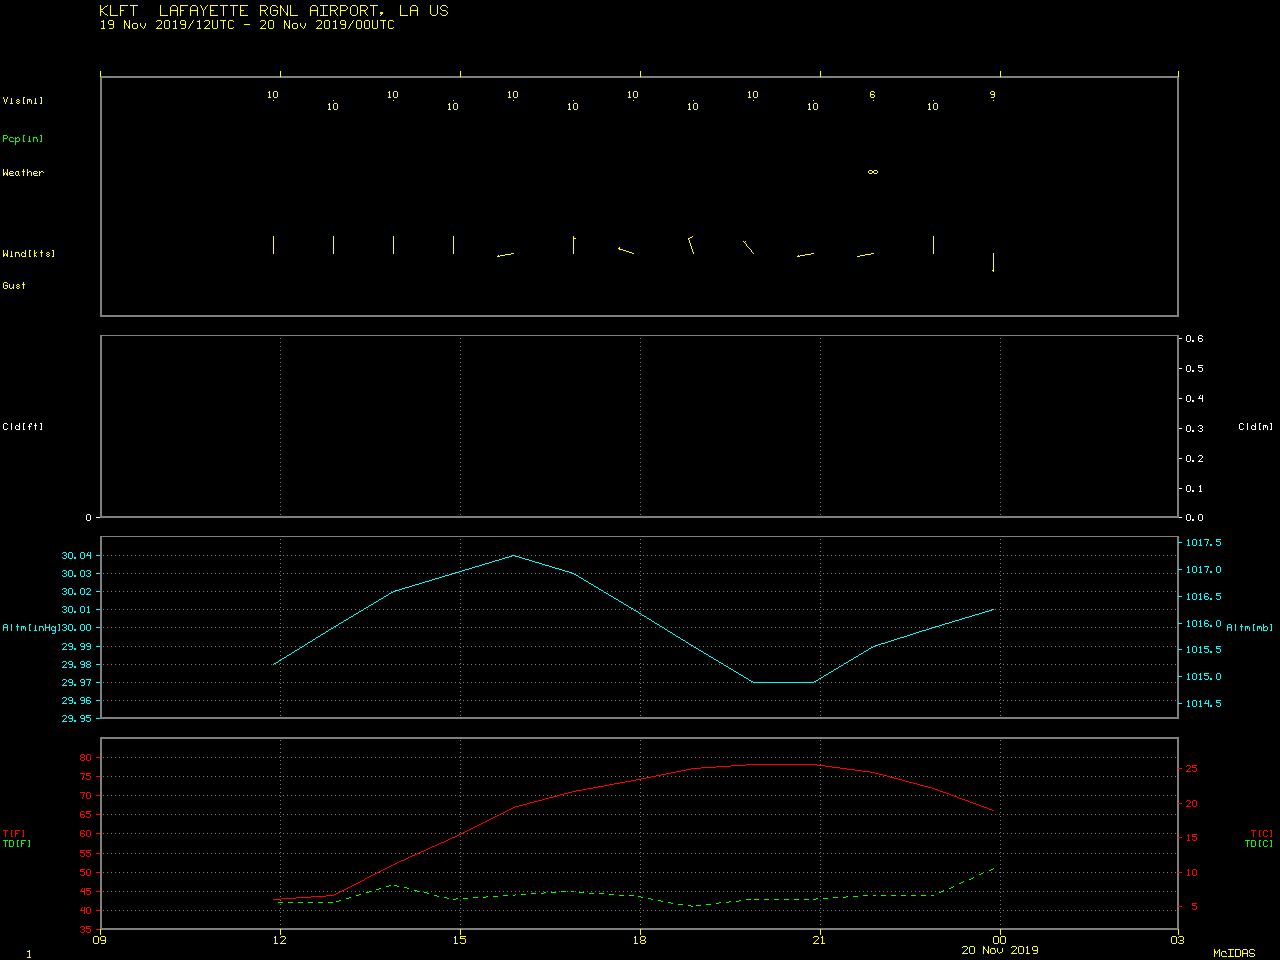 Time series of surface observation data from Lafayette Regional Airport in Louisiana [click to enlarge]